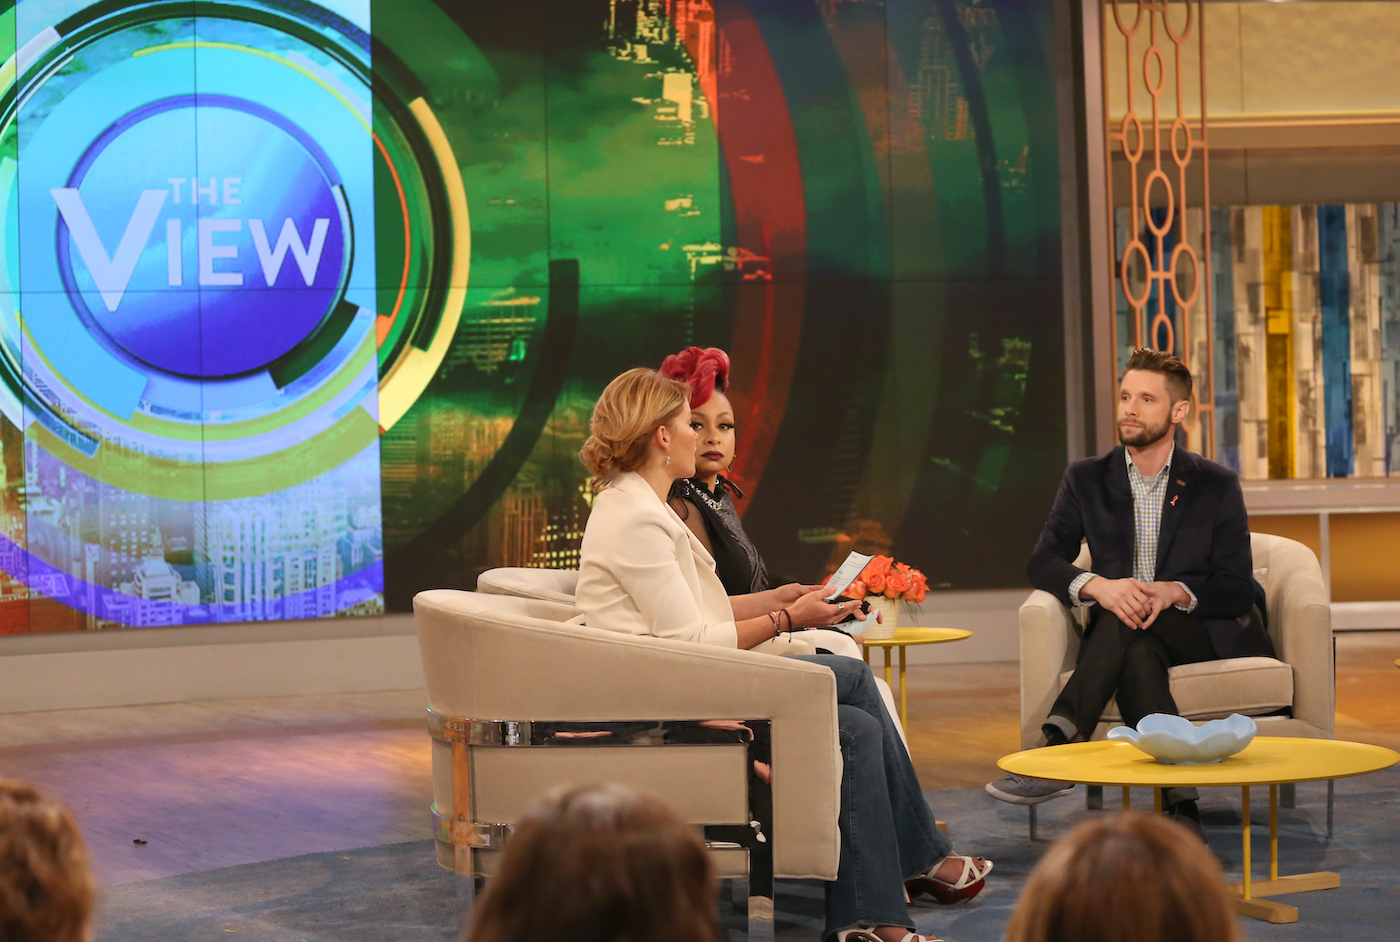 ‘The View’: Danny Pintauro Slams Candace Cameron Bure Interview as ‘Horrifying’ and a ‘Lowest Point’